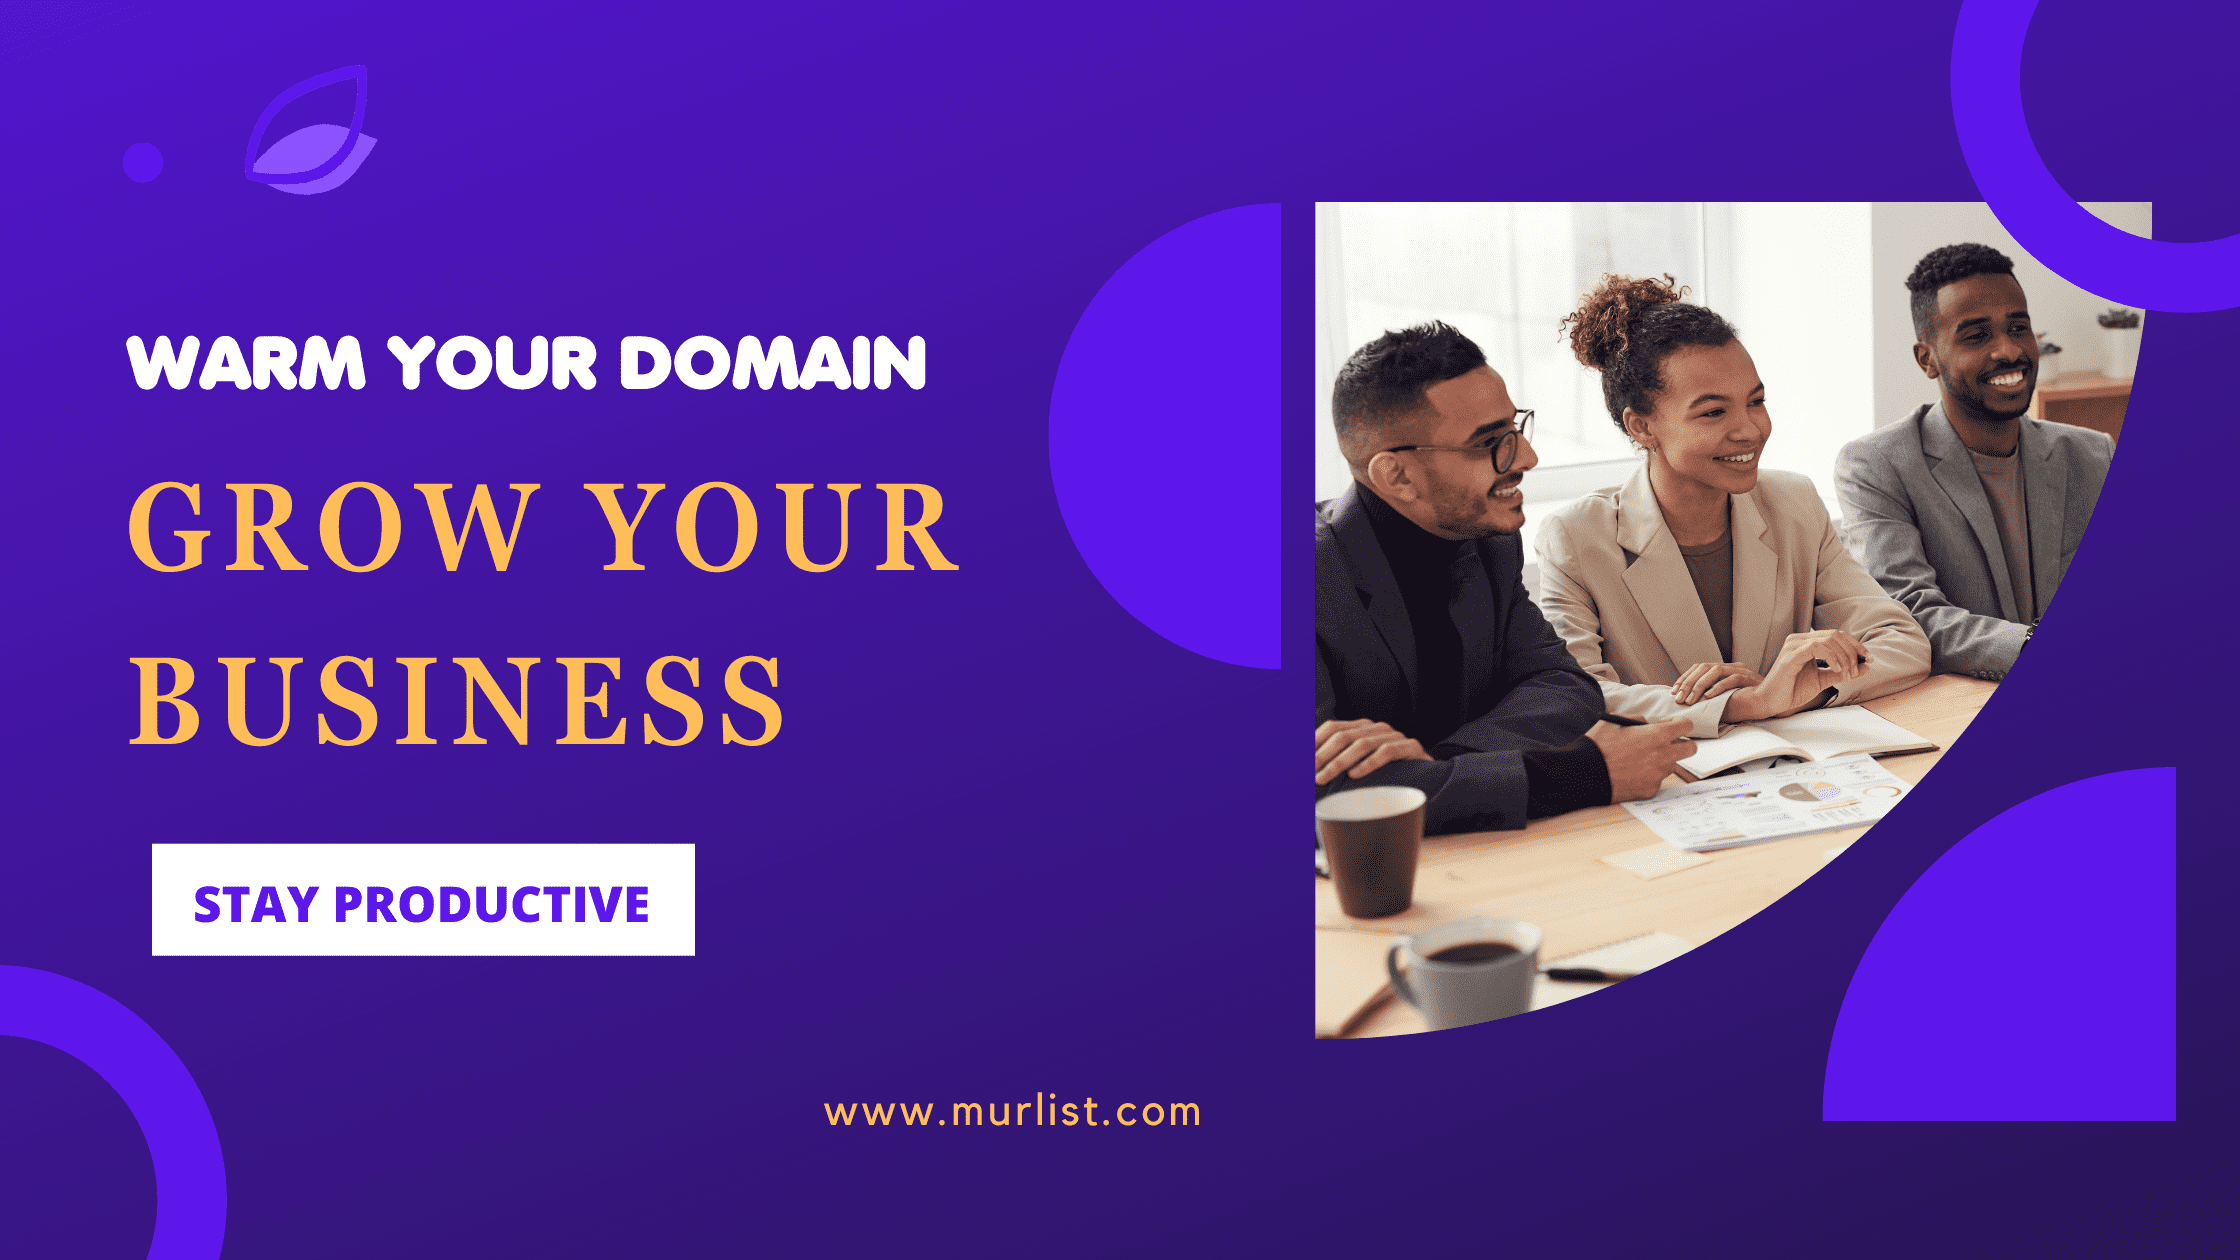 Warm Your Domain & Grow Your Business